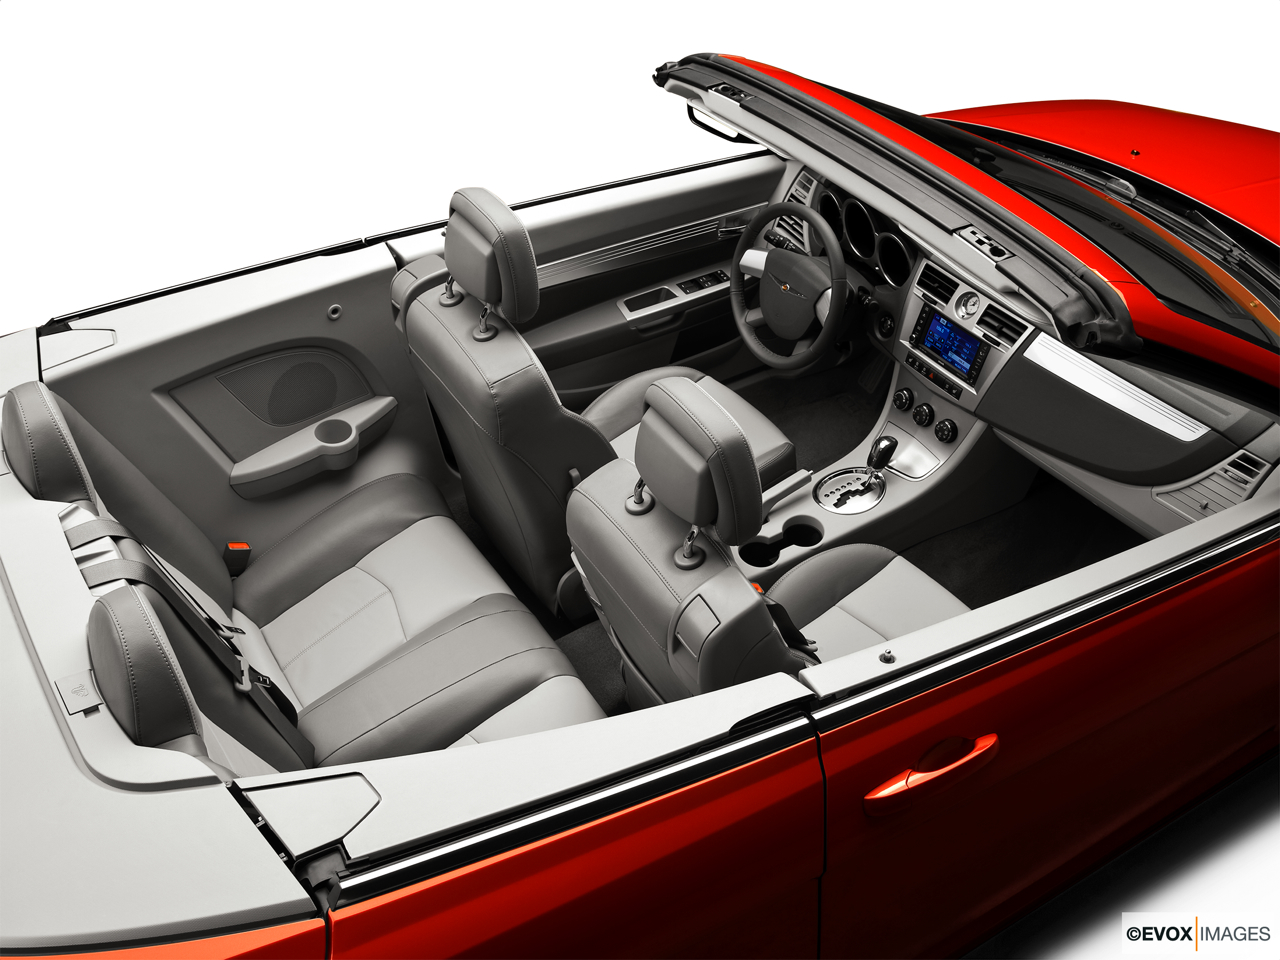 2010 Chrysler Sebring Touring Convertible Hero (high from passenger, looking down into interior). 